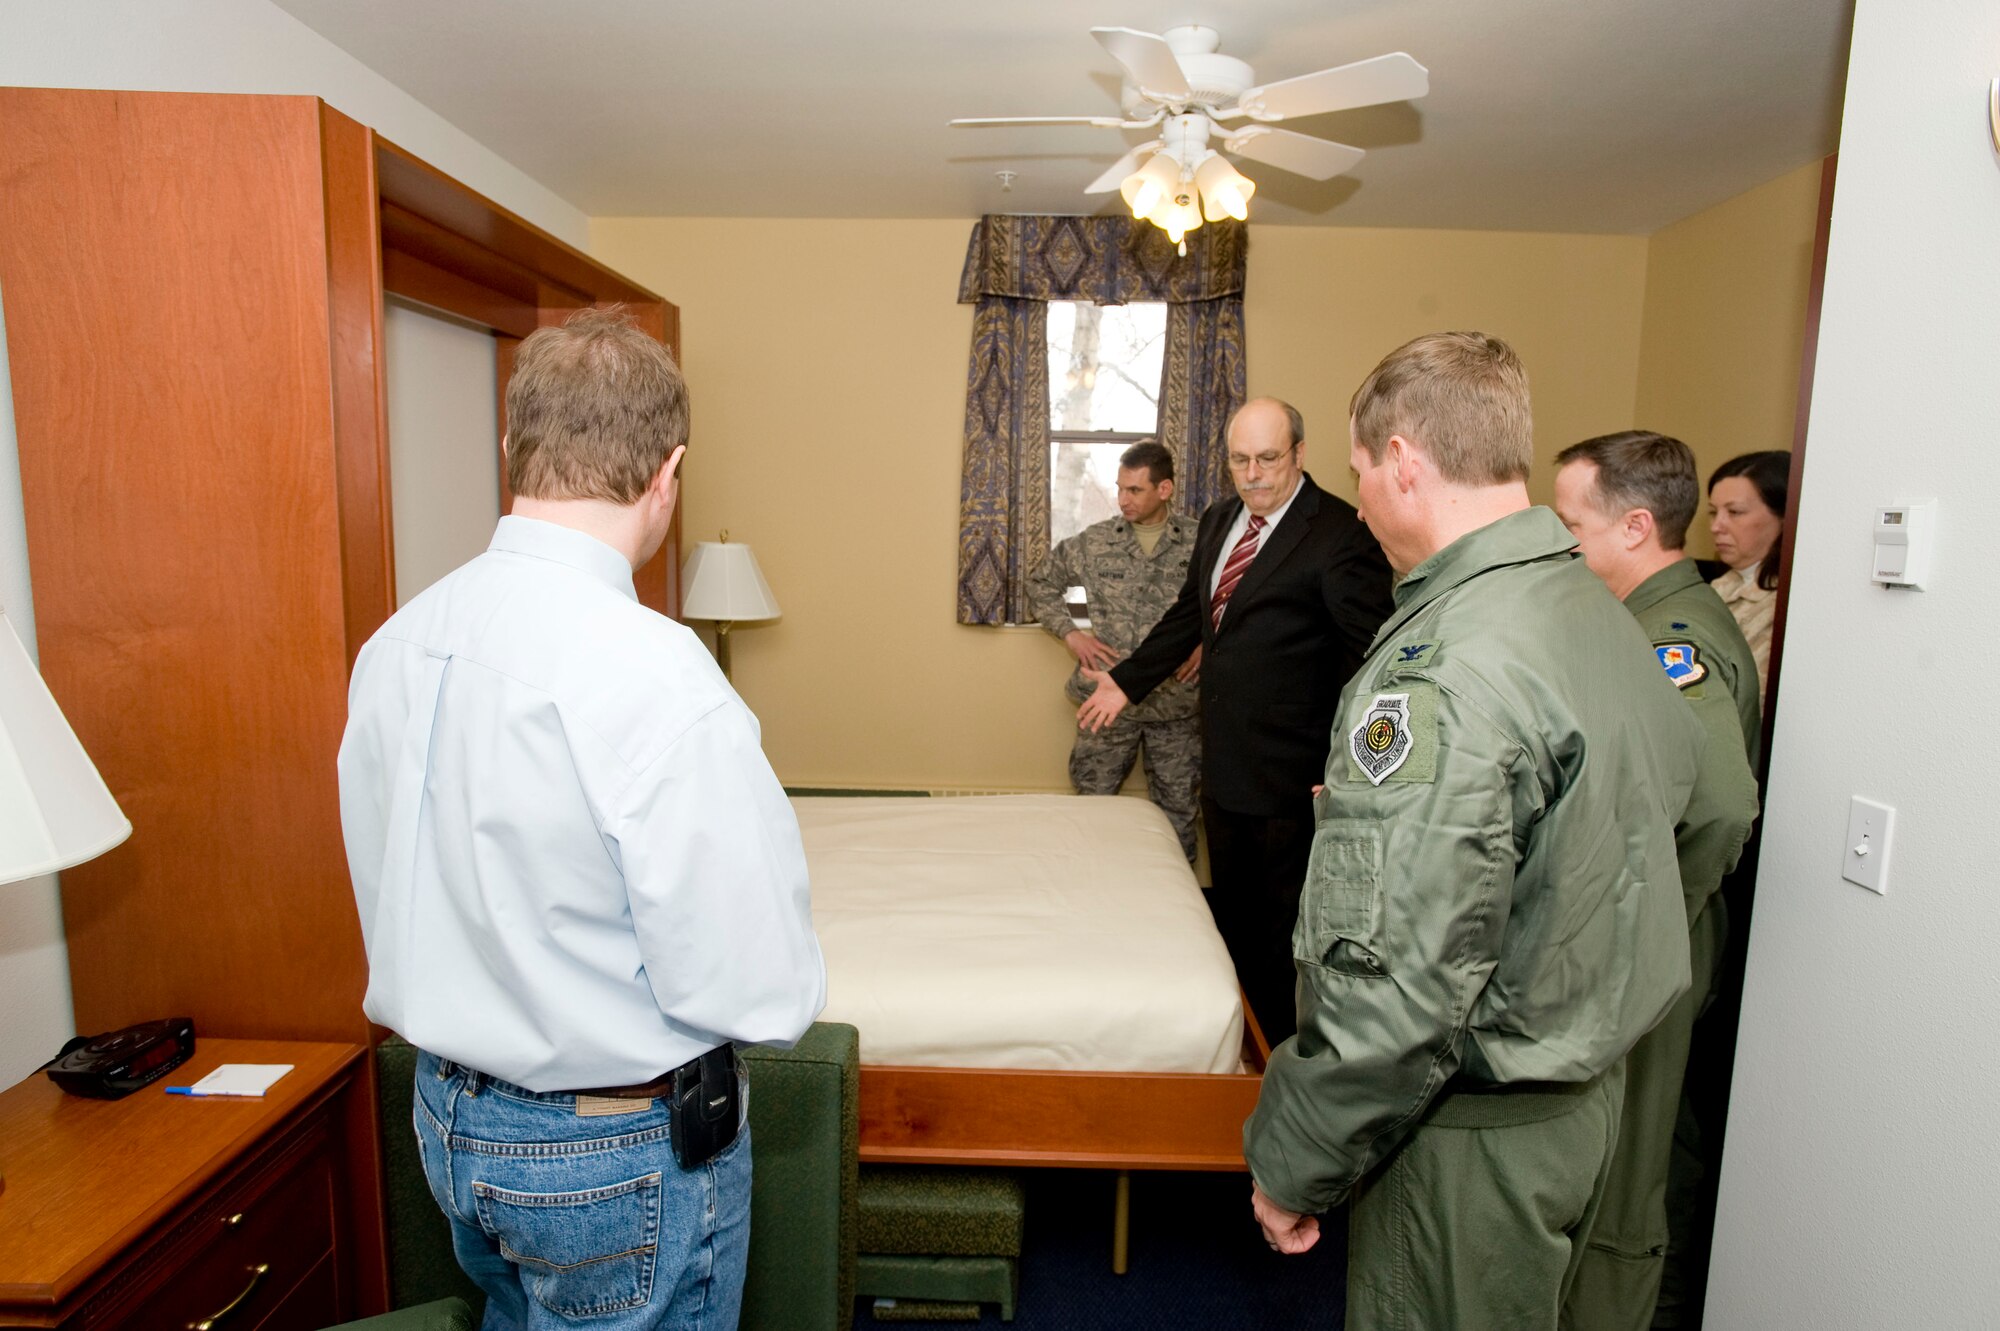 ELMENDORF AIR FORCE BASE, Alaska -- Mike Higby, North Star Inn lodging manger (center in black suit), Shows off Air Force lodging's first Murphy bed during grand opening of Denali Hall April 3, 2009. North Star Inn added another 119 suites, bringing the total number of lodging rooms available to 591 with the renovotions of Denali Hall complete. The renovations took 18 months and cost $22 million. (U.S. Air Force photo by Senior Airman Jonathan Steffen) 
